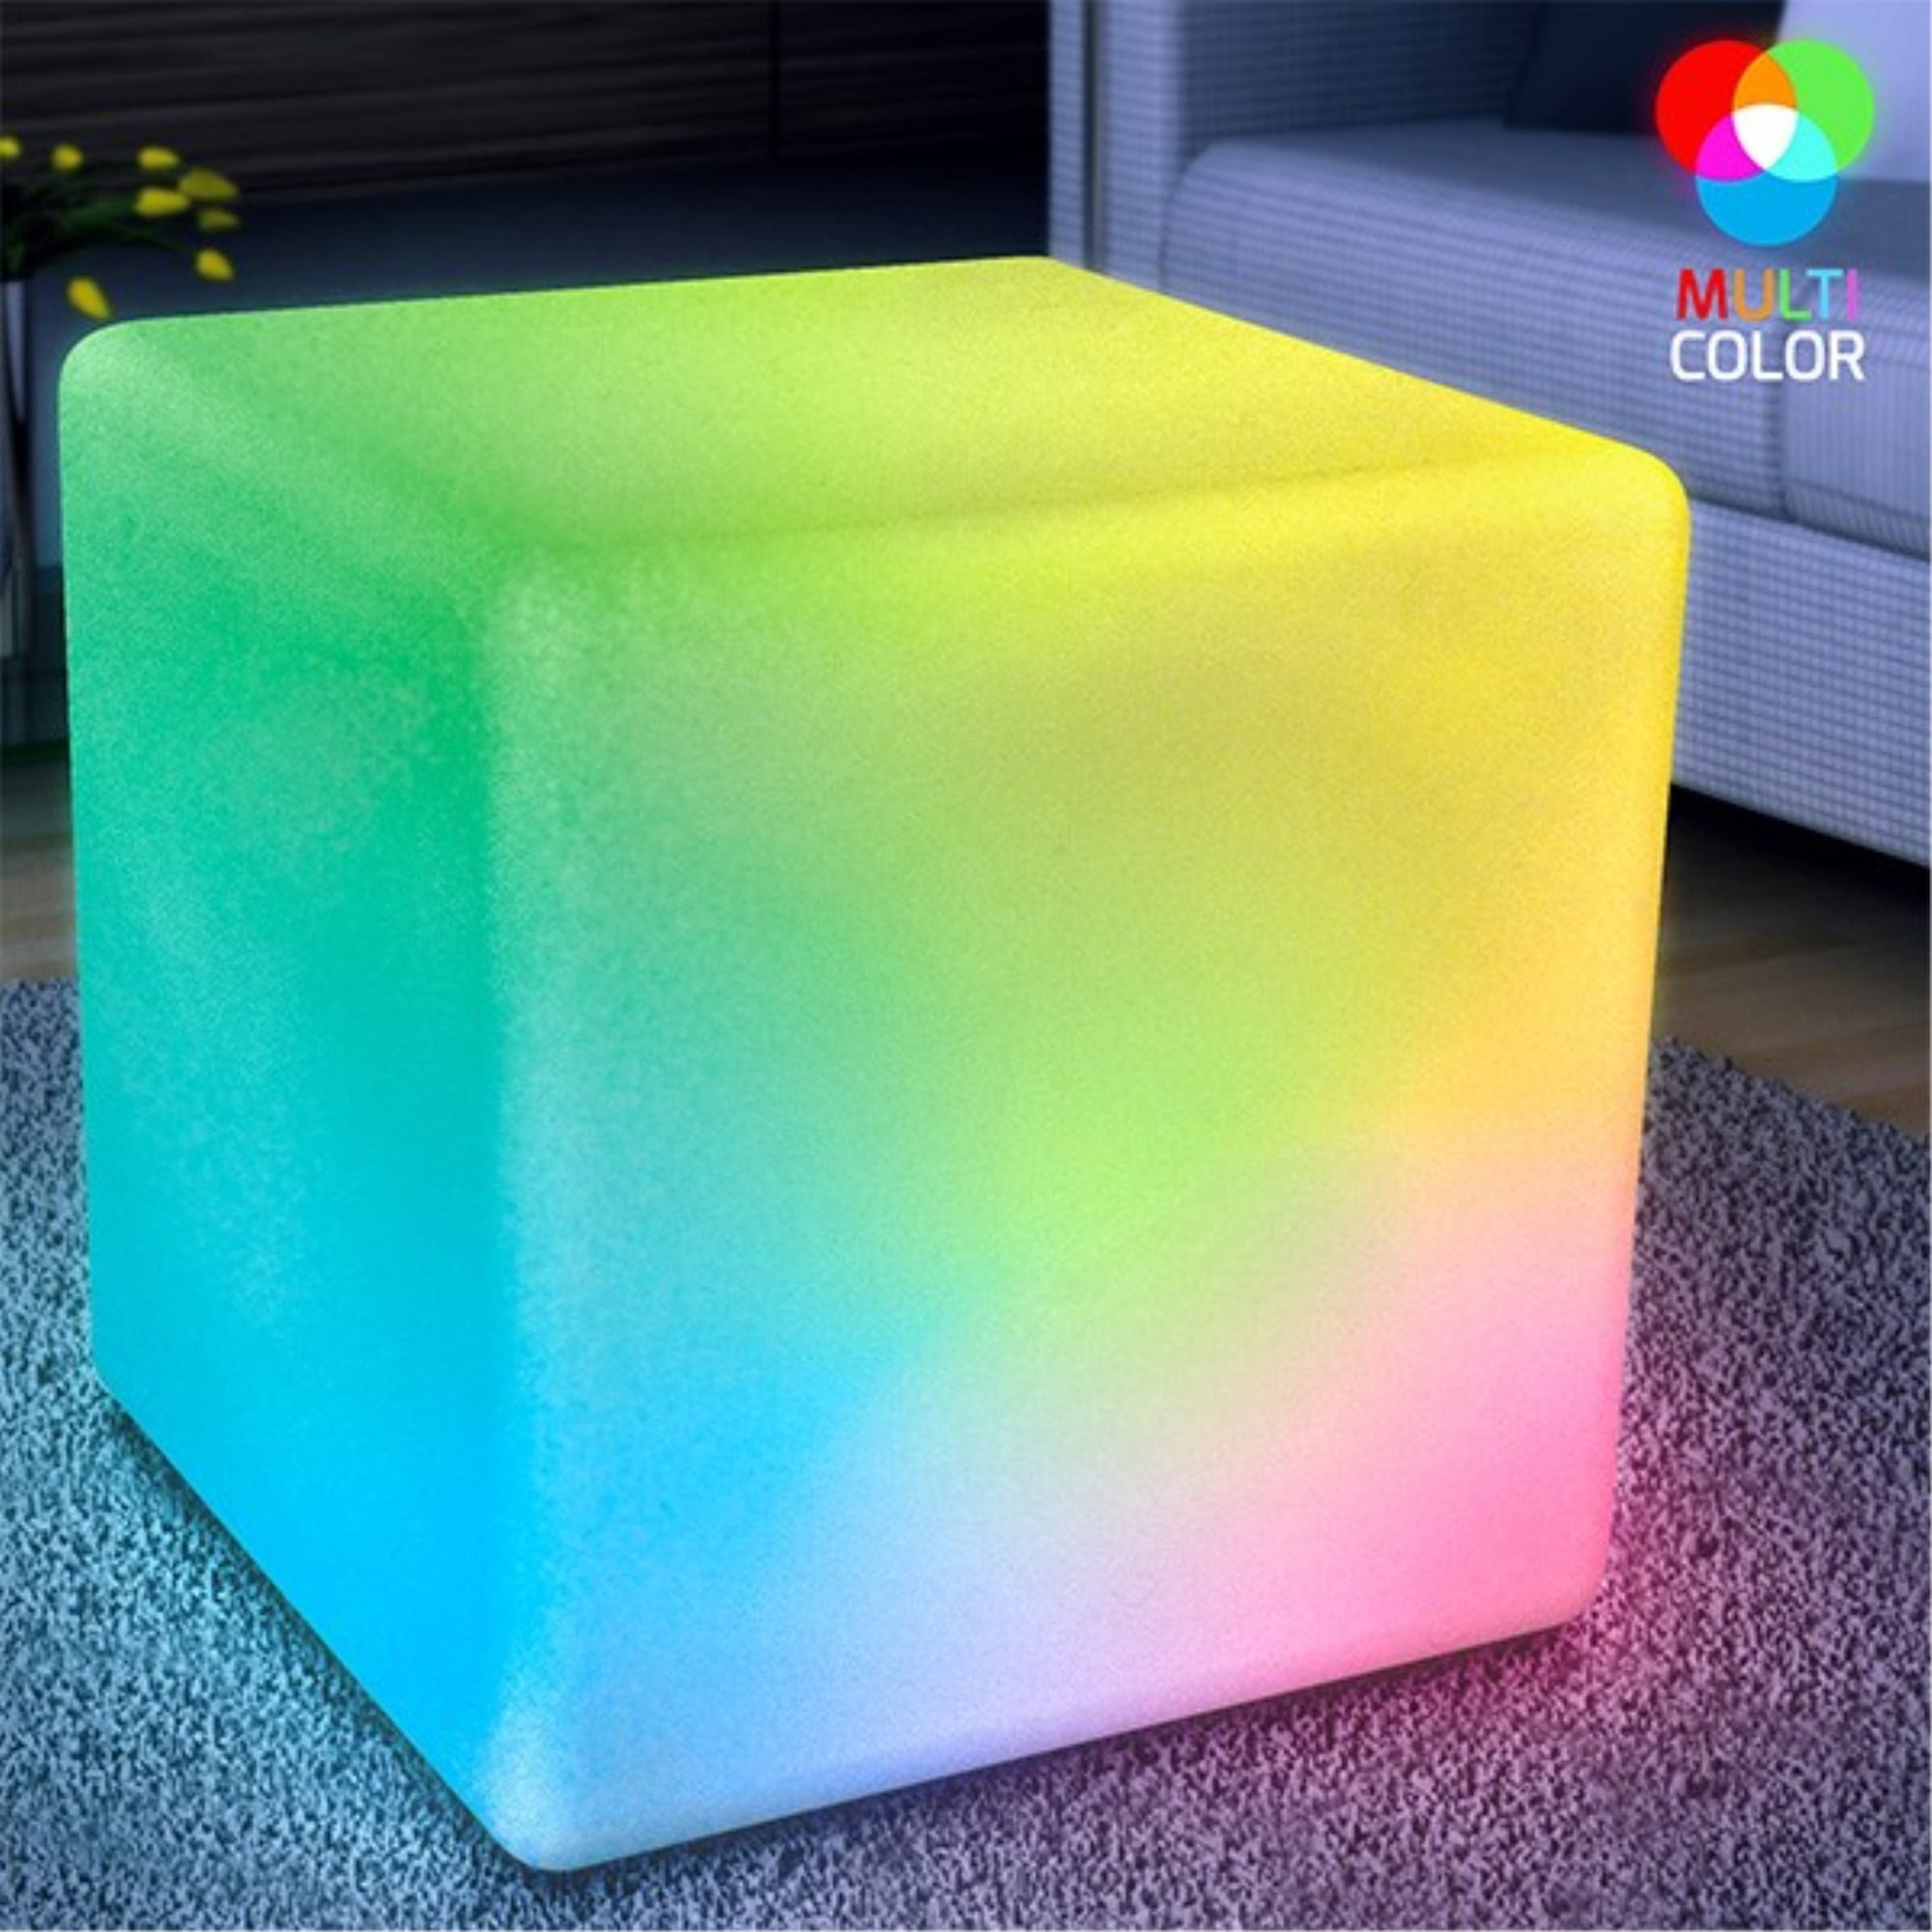 210 Huge Led Cube Light Chair Stool Table Furniture